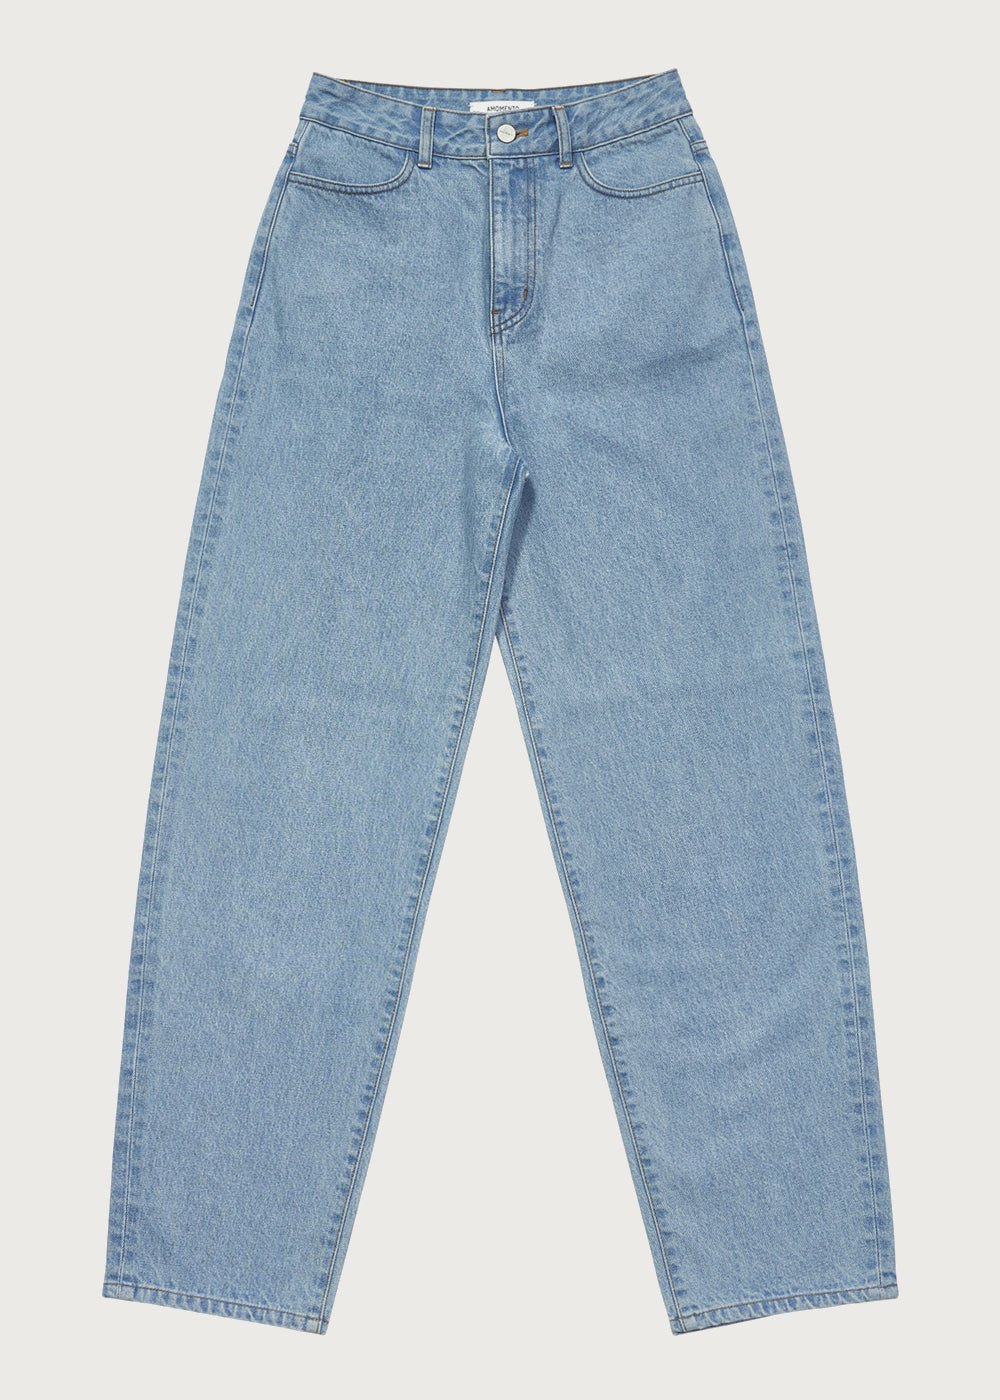 Recycled Cotton Denim Jeans in Light Blue by AMOMENTO – New